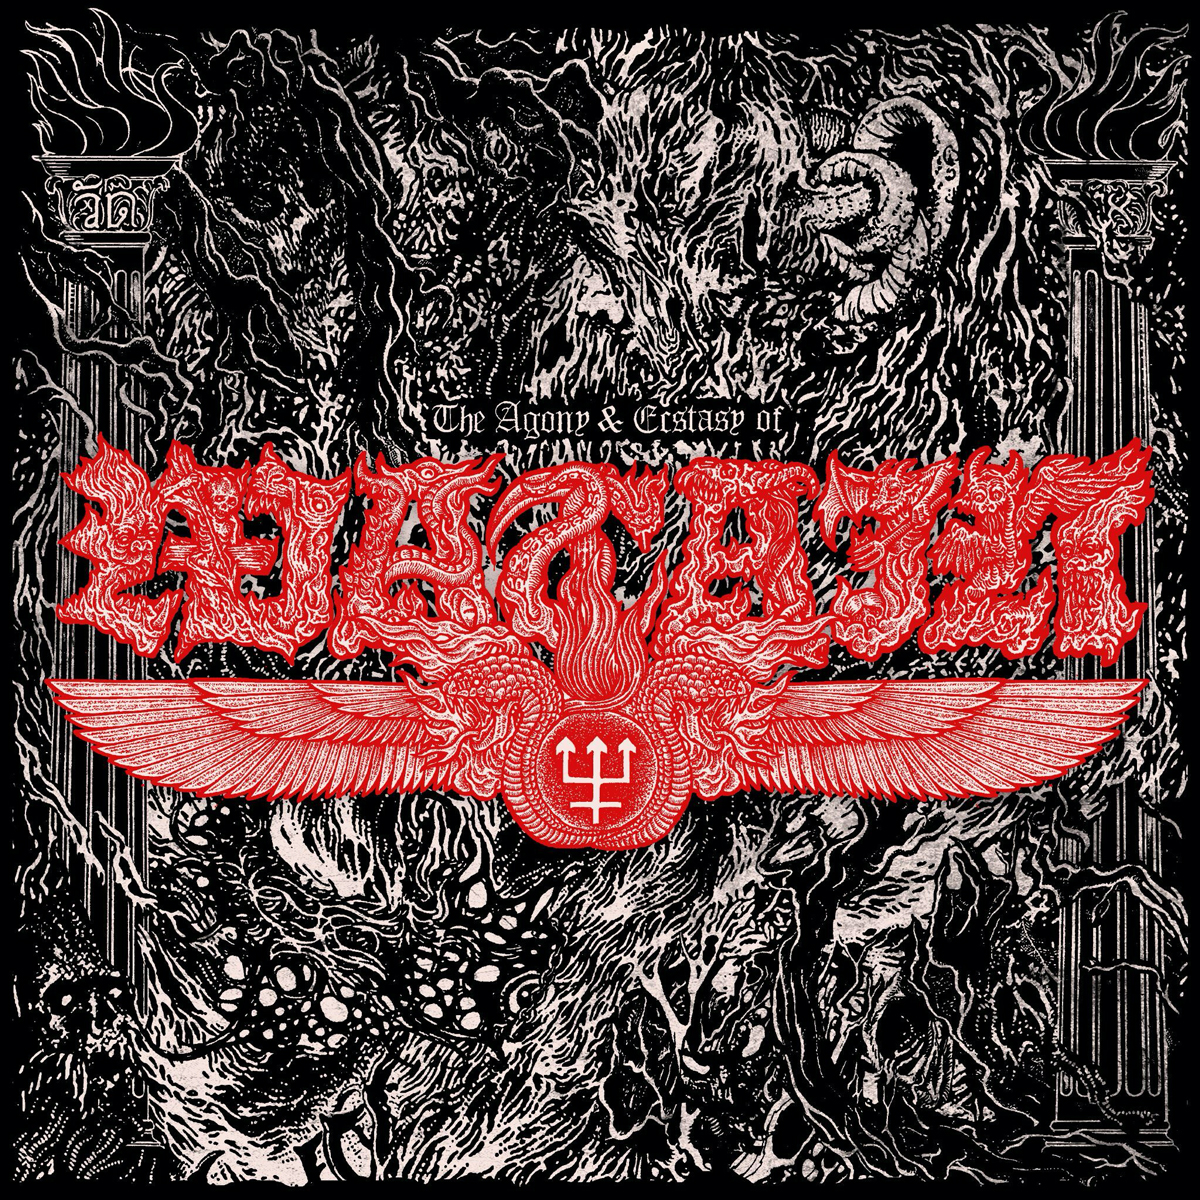 watain_The-AgonyEcstasy-of-Watain